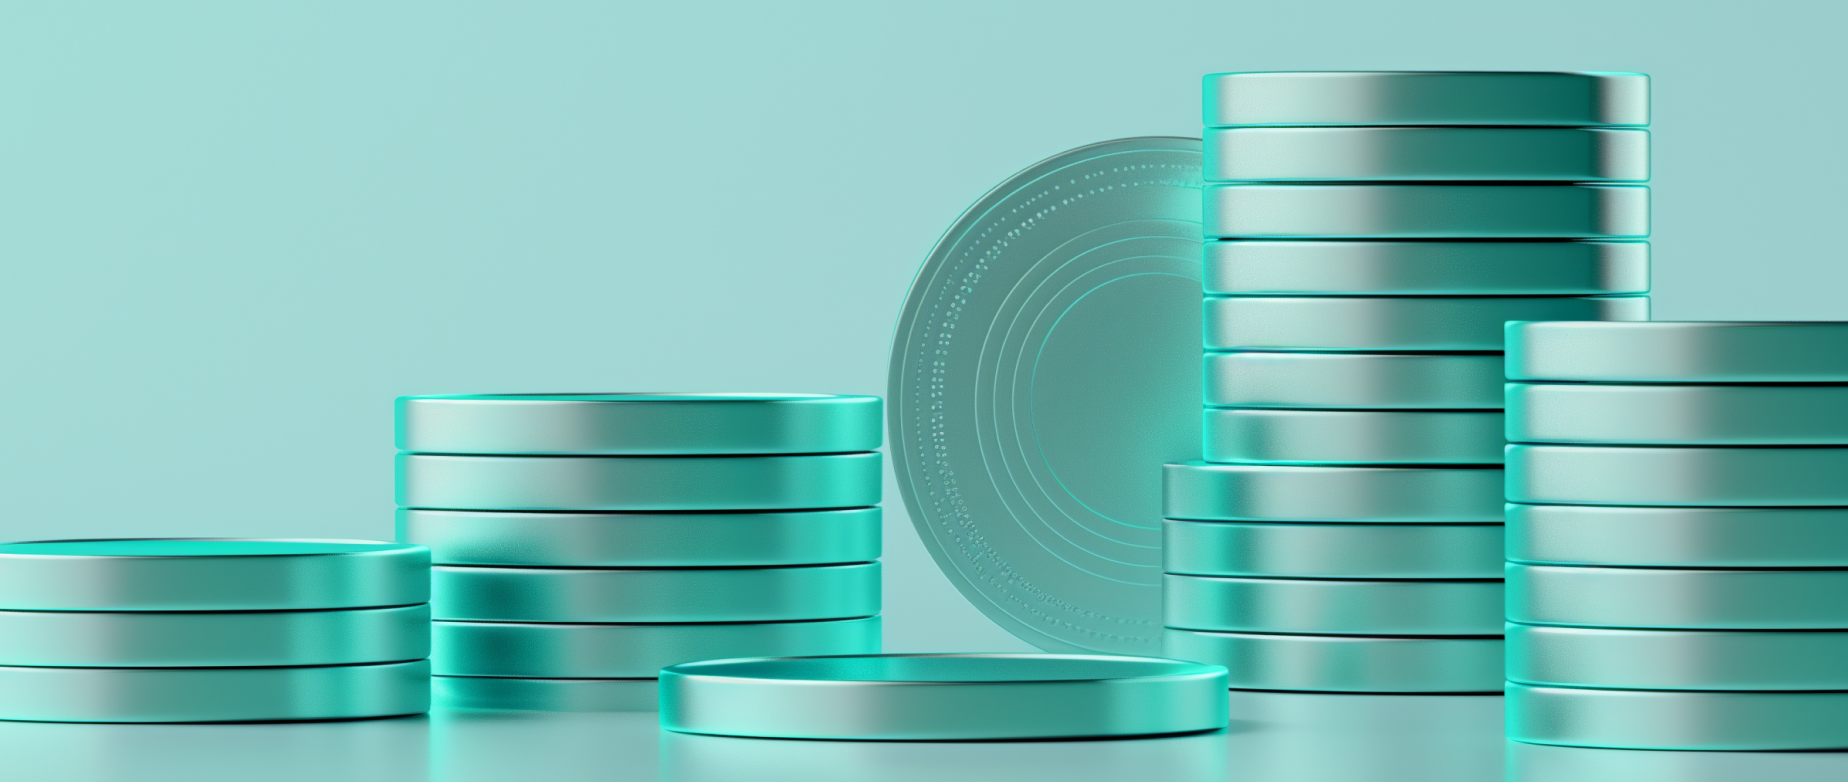 Stacks of coins on a light blue background.